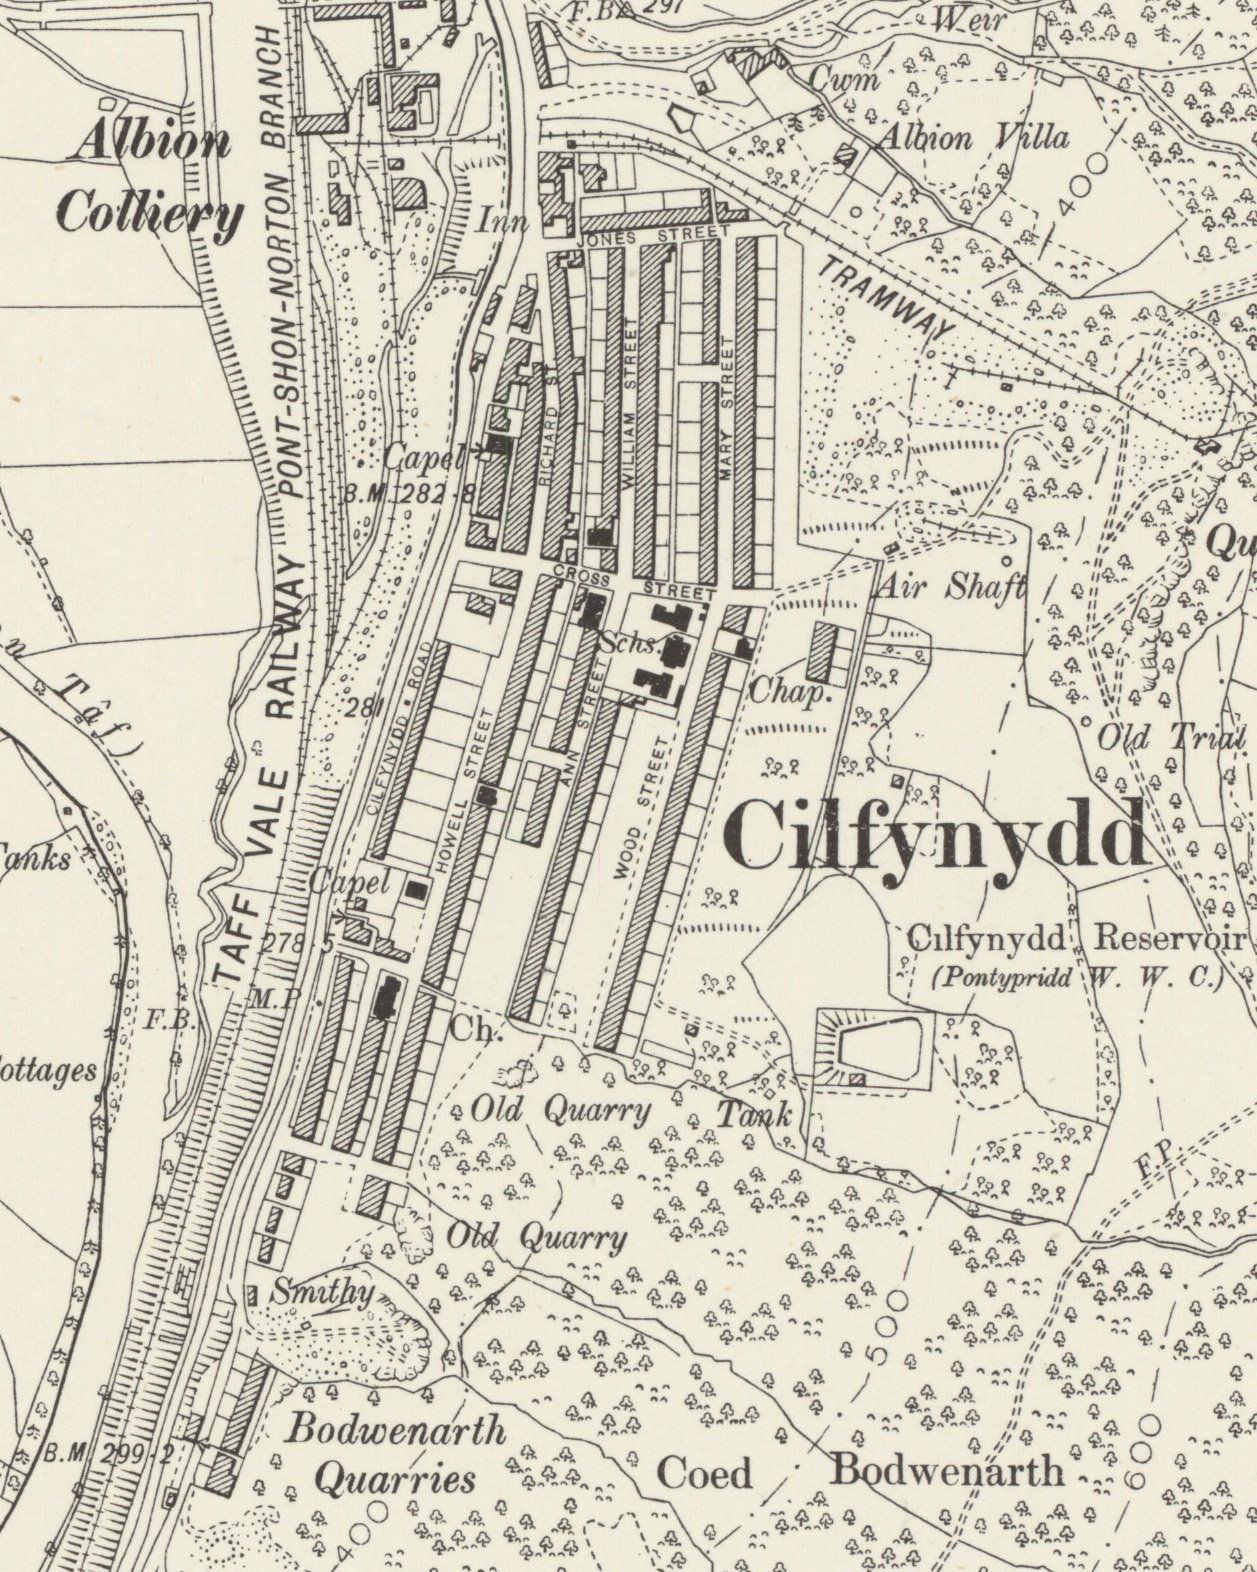 Cilfynydd 16 years later in 1901 and much changed